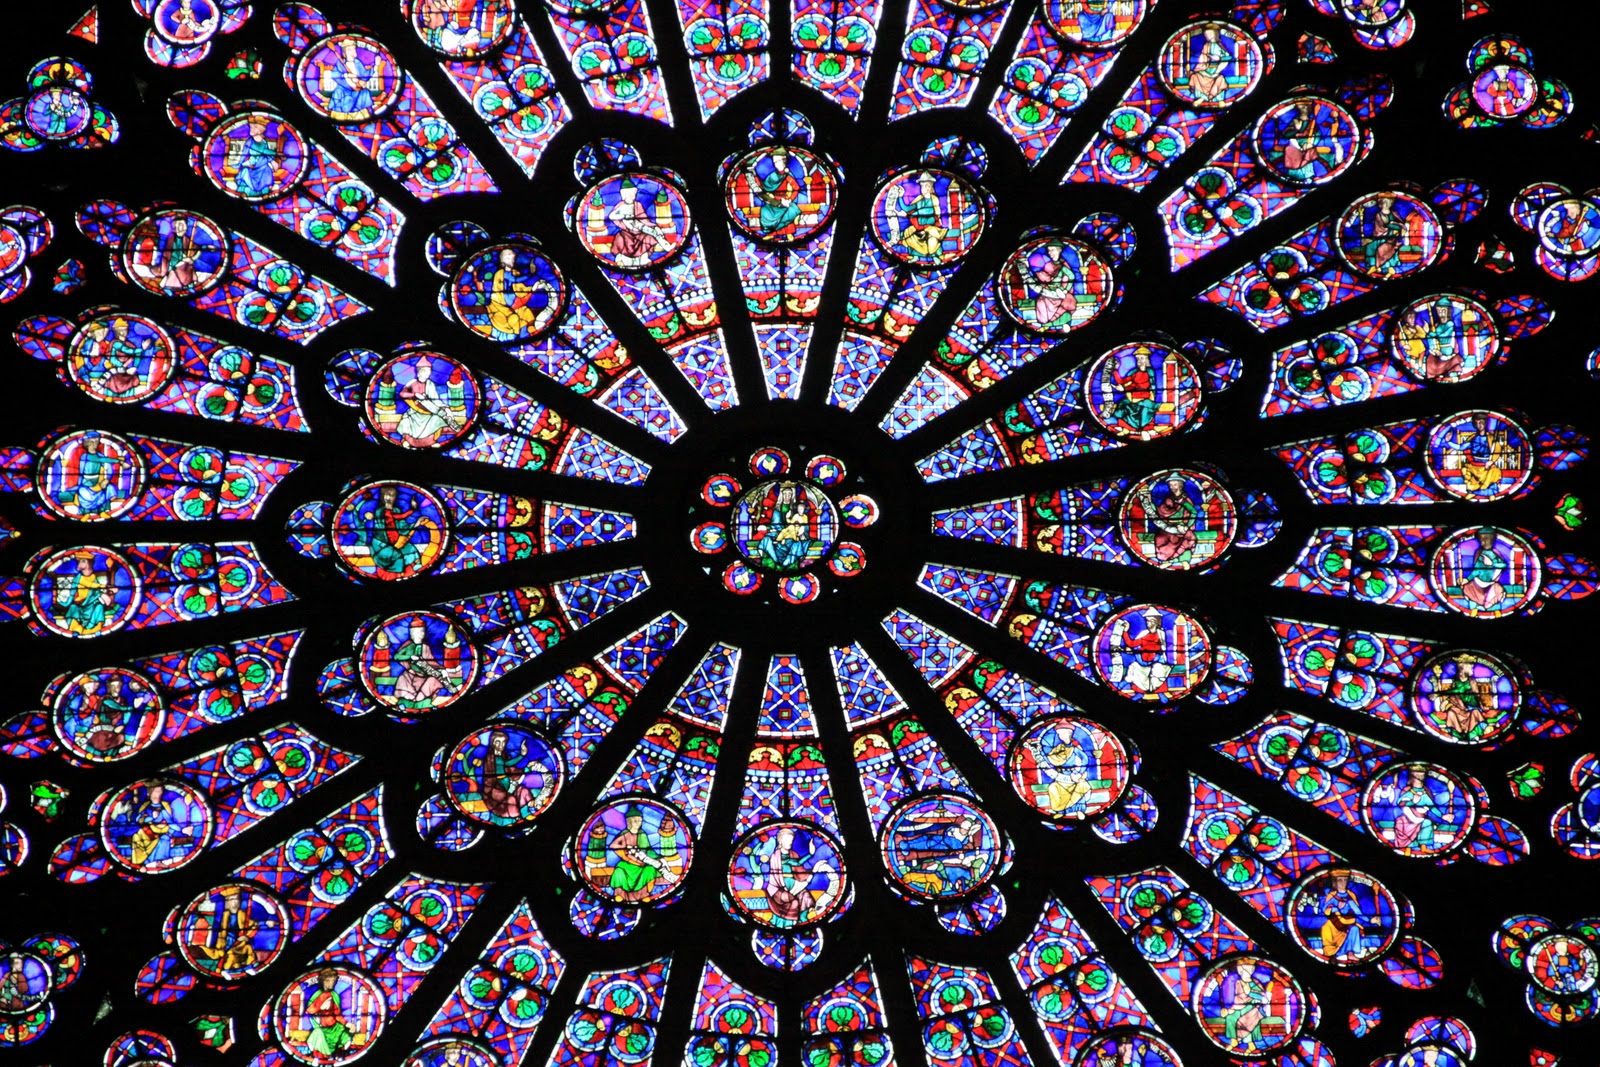 Free HD stained glass, religious, notre dame de paris, cathedral, colors, design, cathedrals